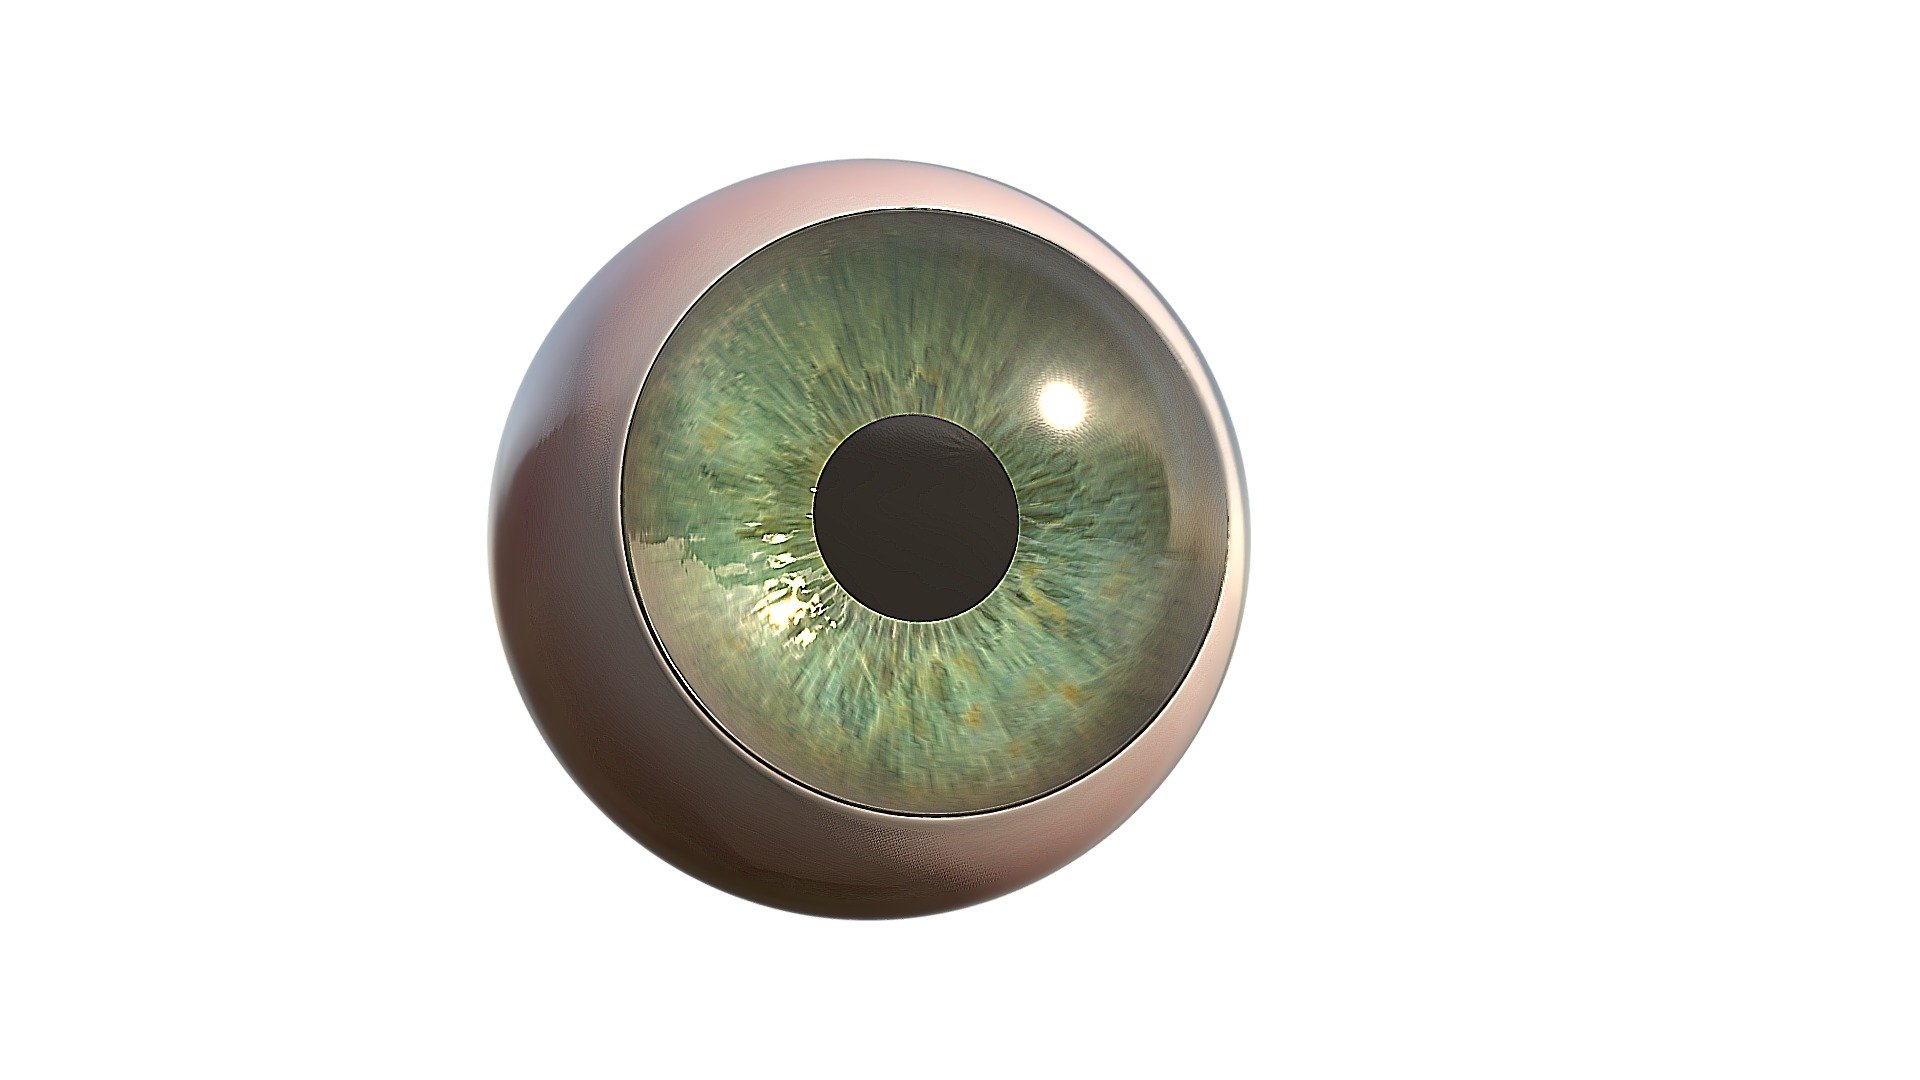 Made with Zbrush - Cartoon eye - 3D model by Loulipop 3d model